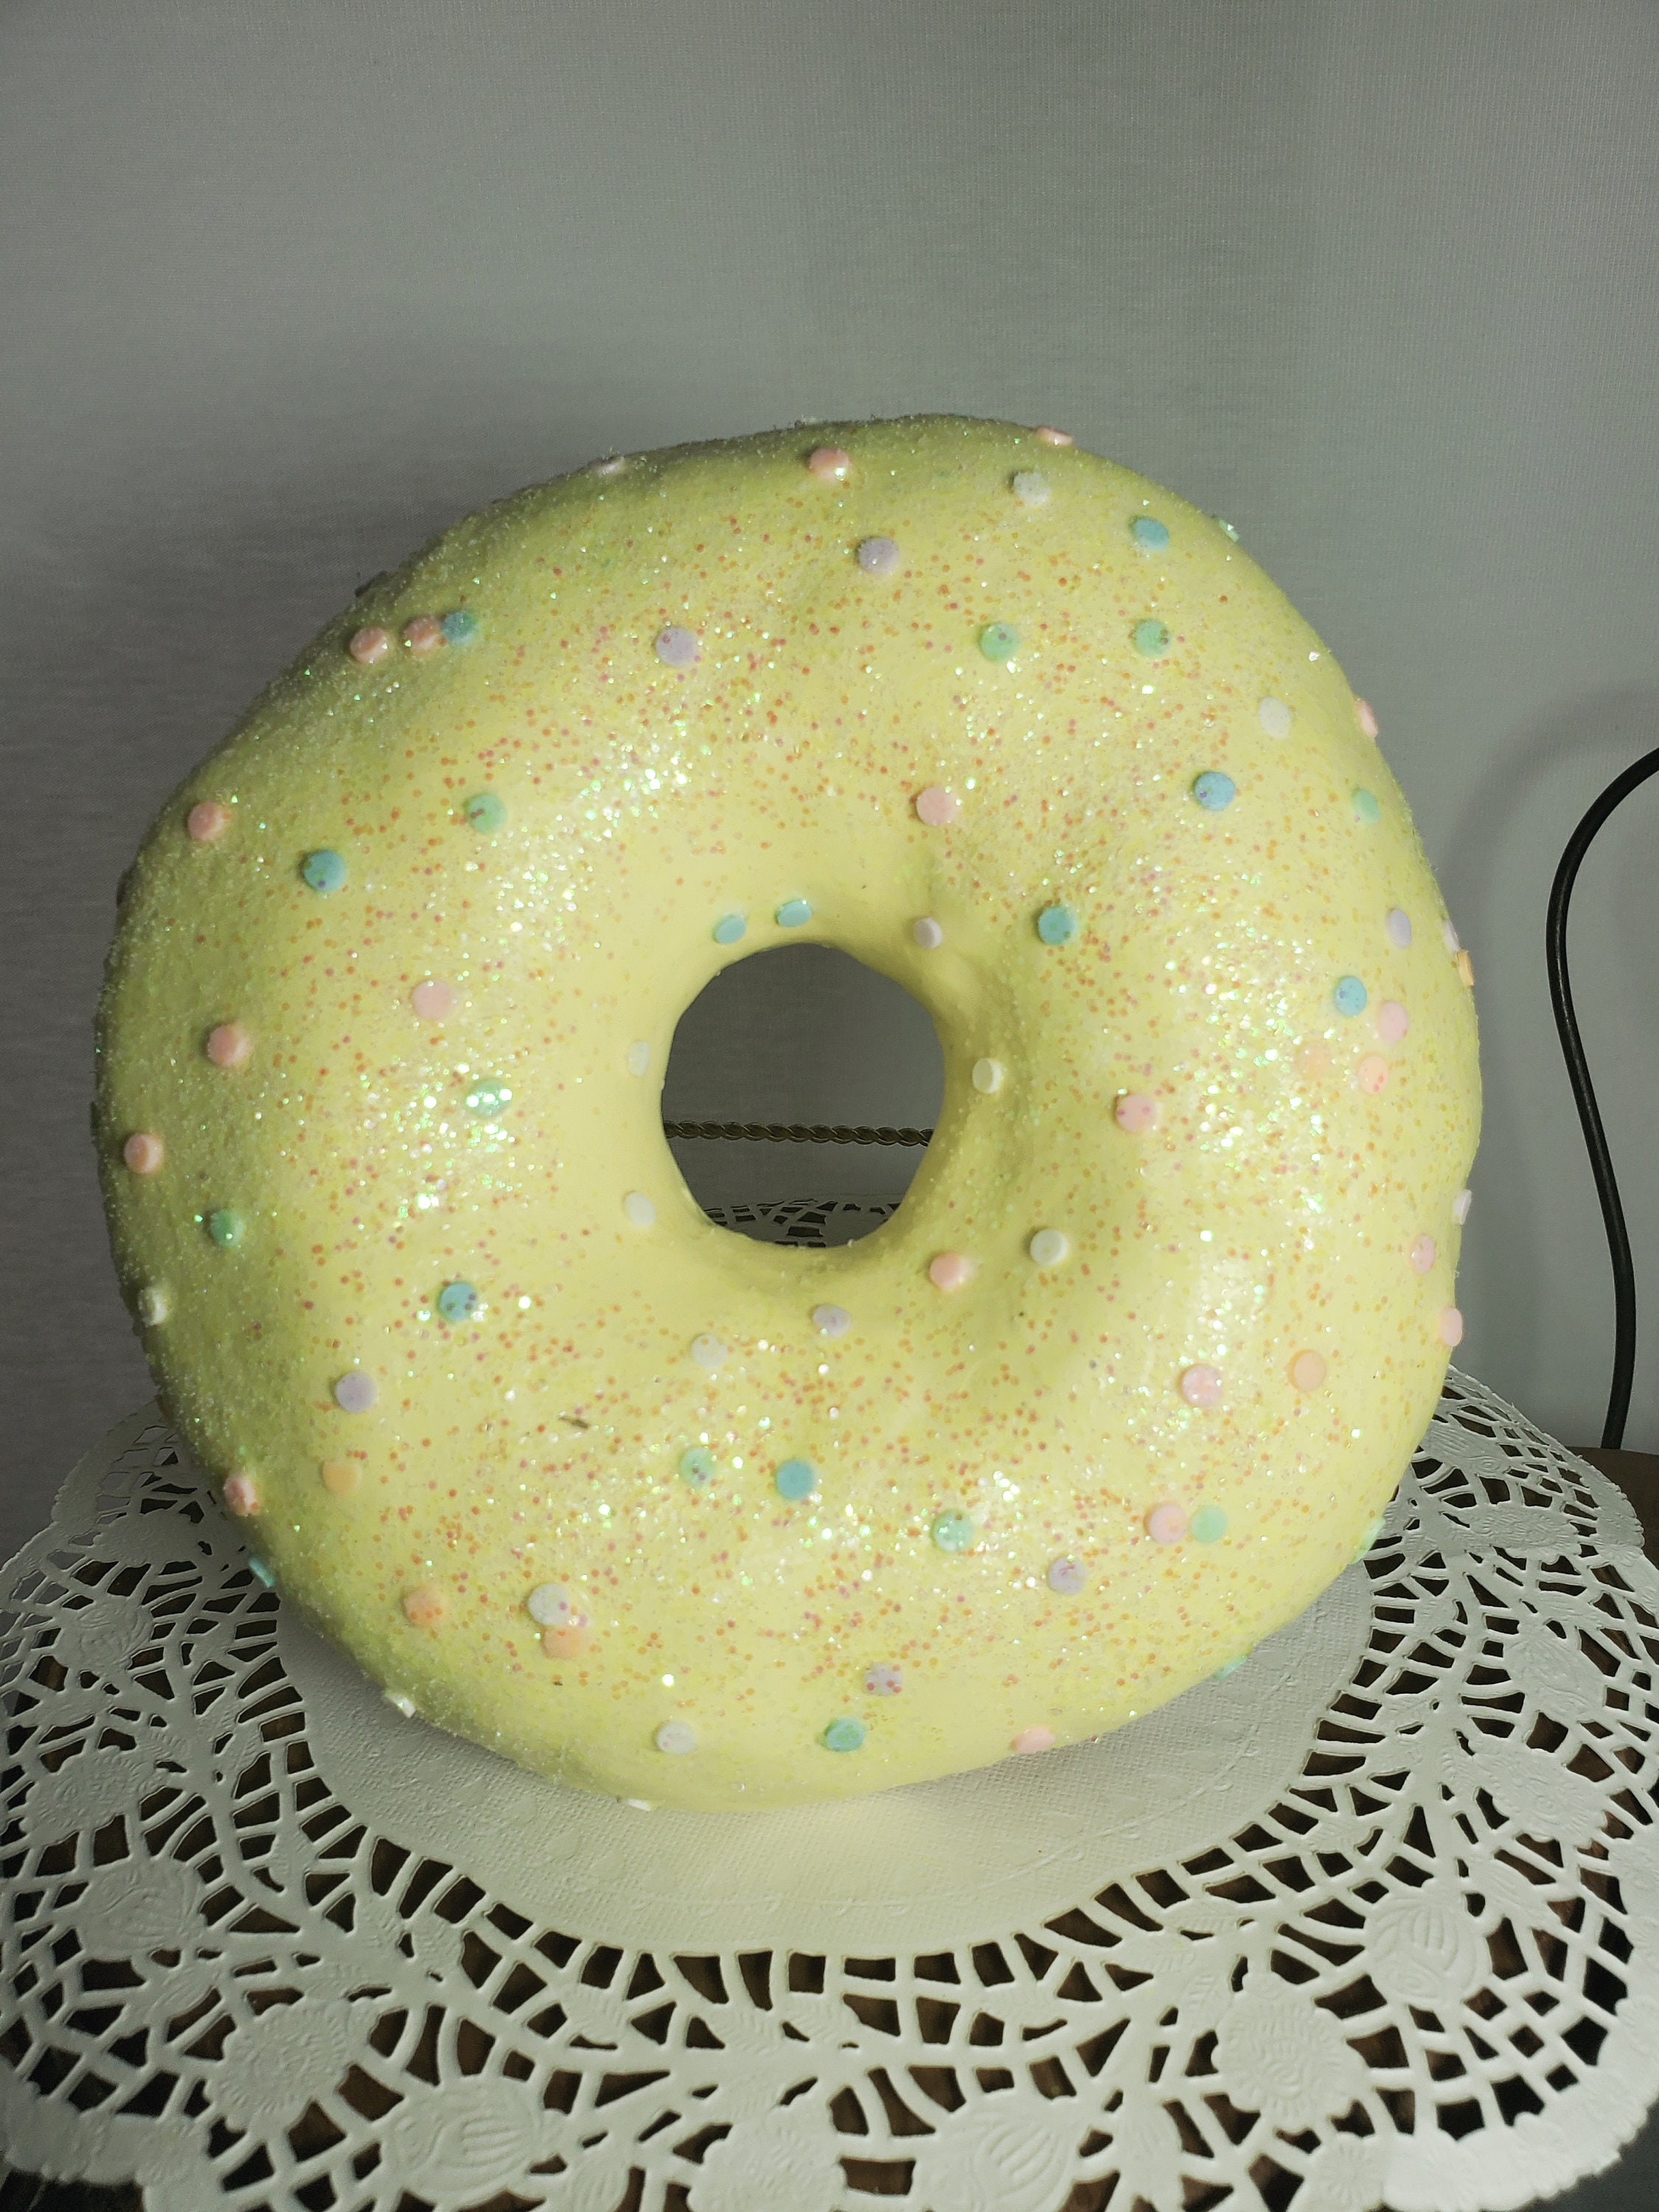 DIY Fake Bake donuts using foam clay! The sprinkles I am using can be